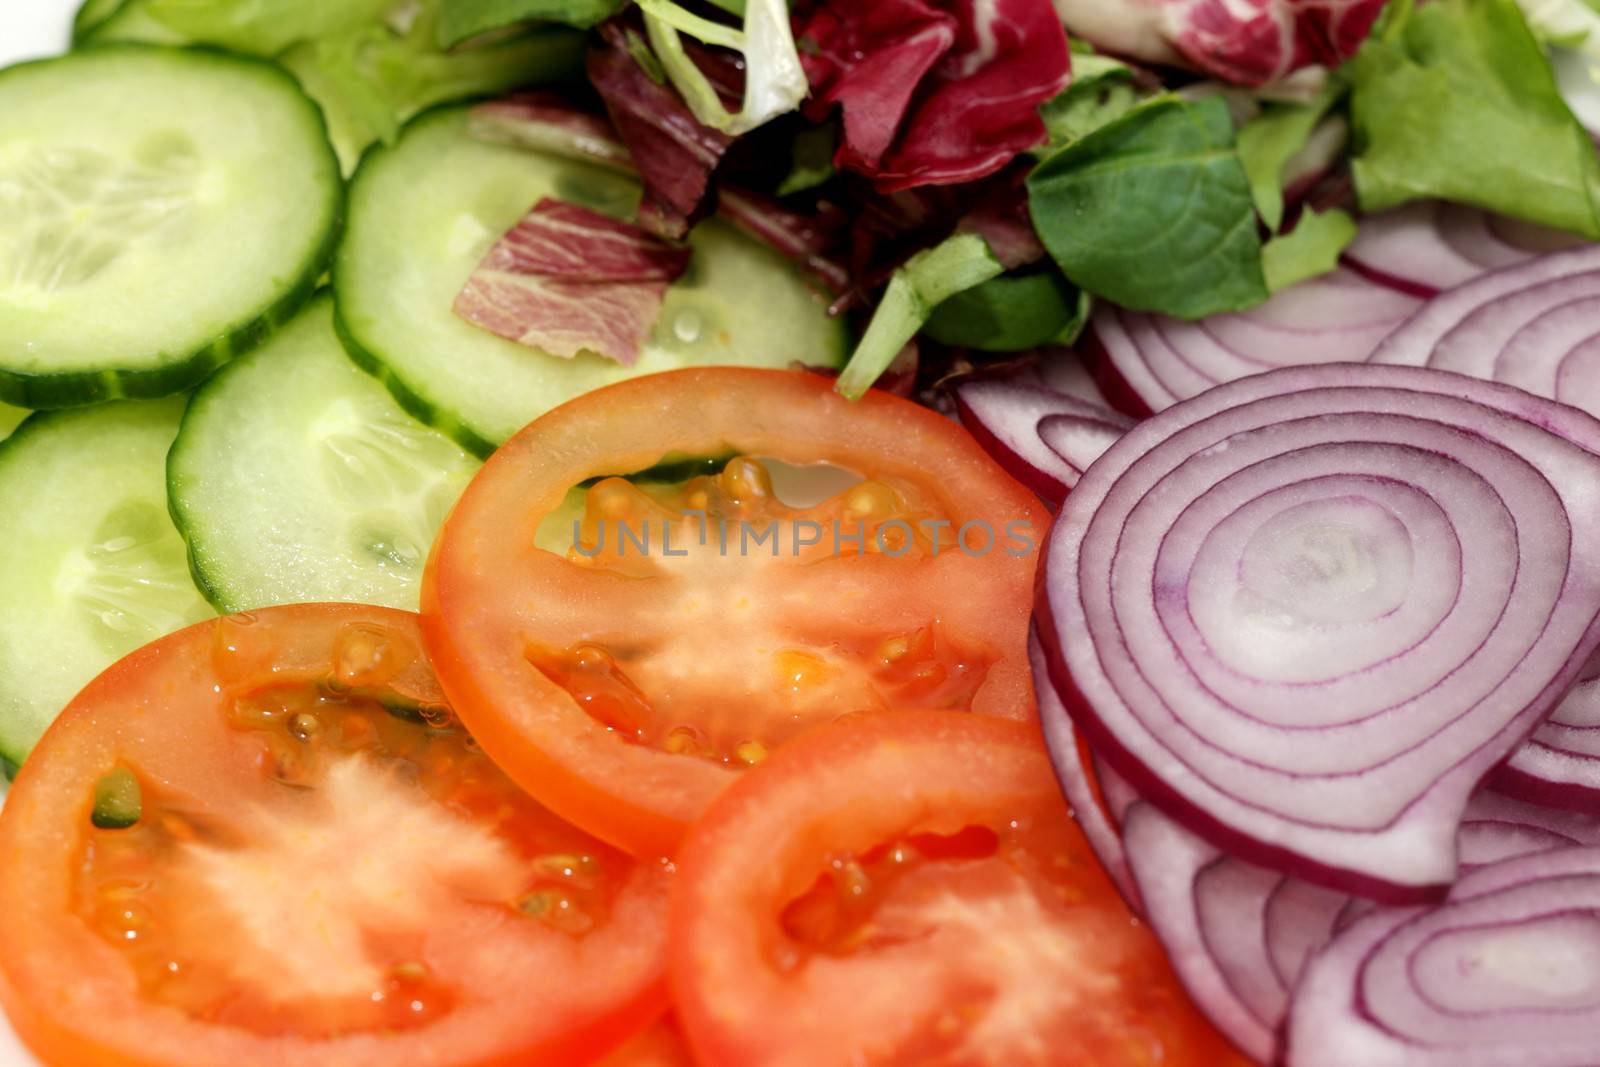 Mixed Summer Salad by Whiteboxmedia